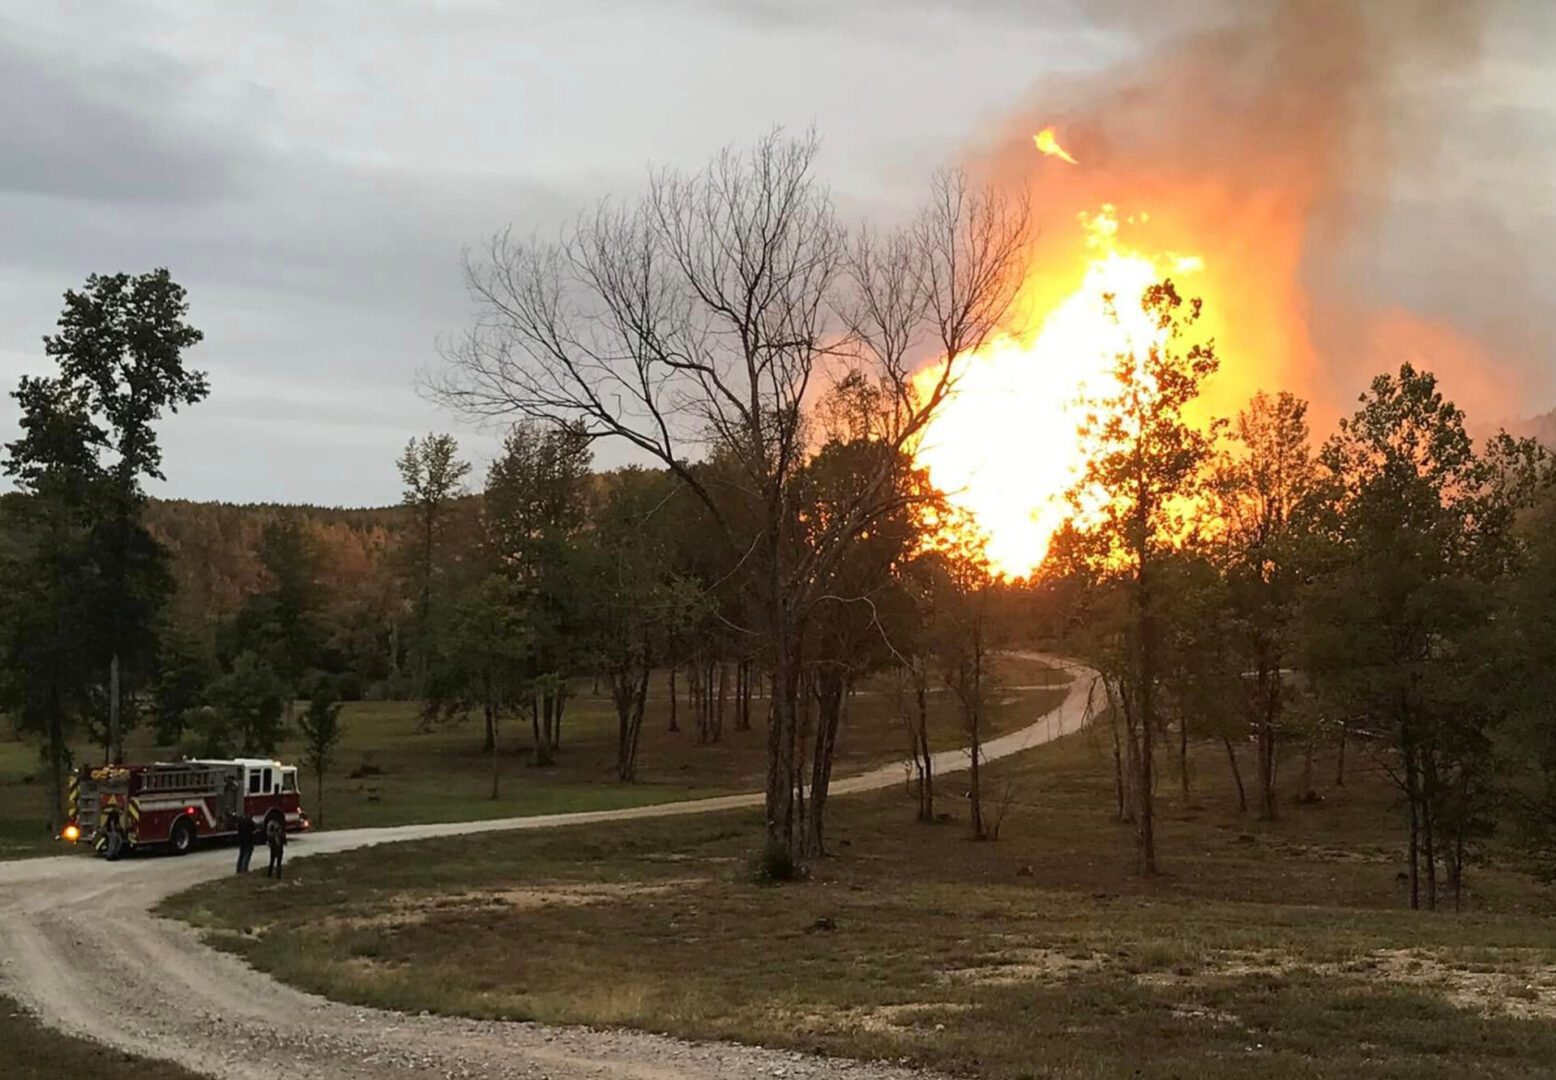 Fire sparked by pipeline explosion causes mile-wide evacuation in Arkansas